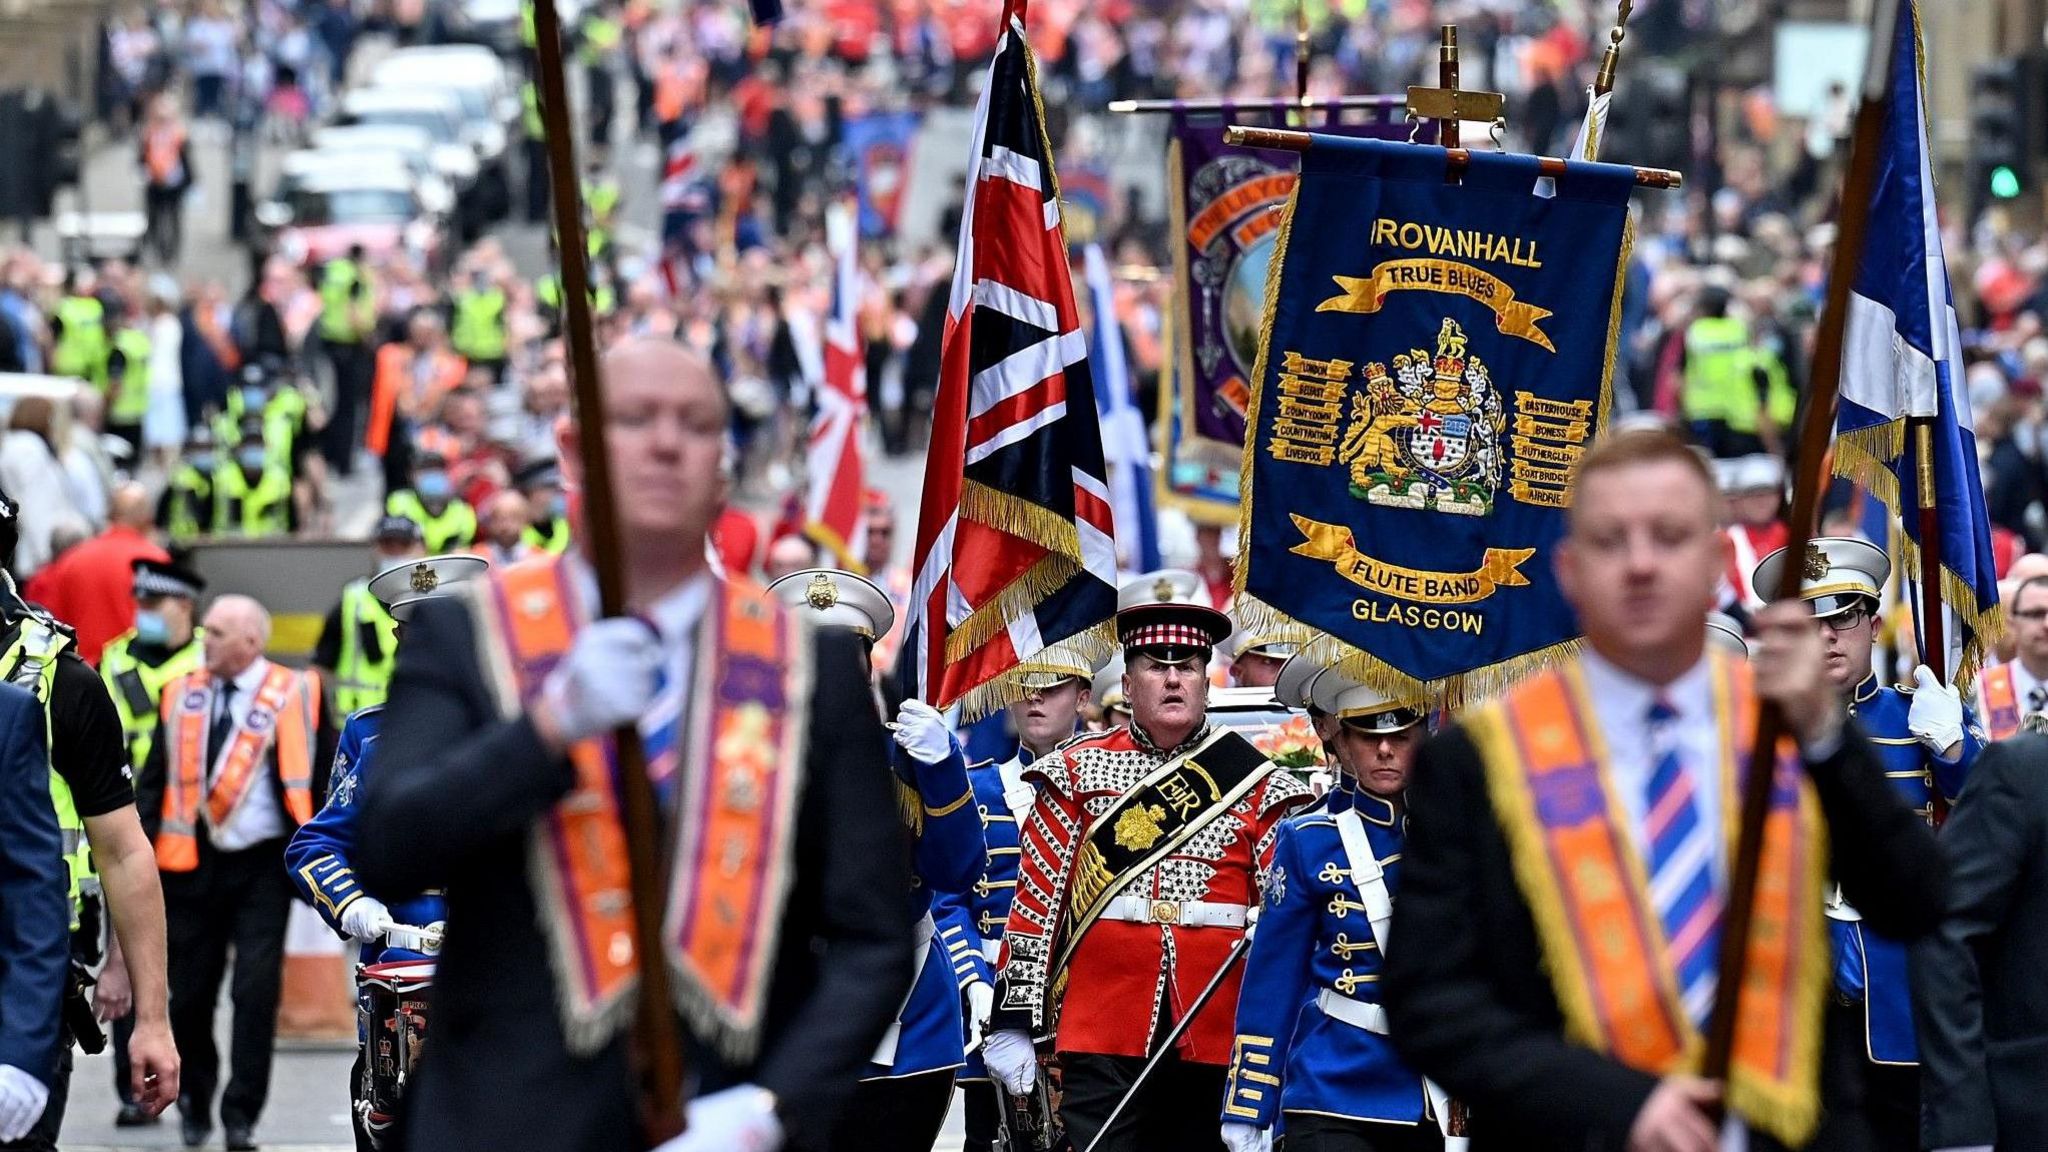 An Orange march through the streets of Glasgow